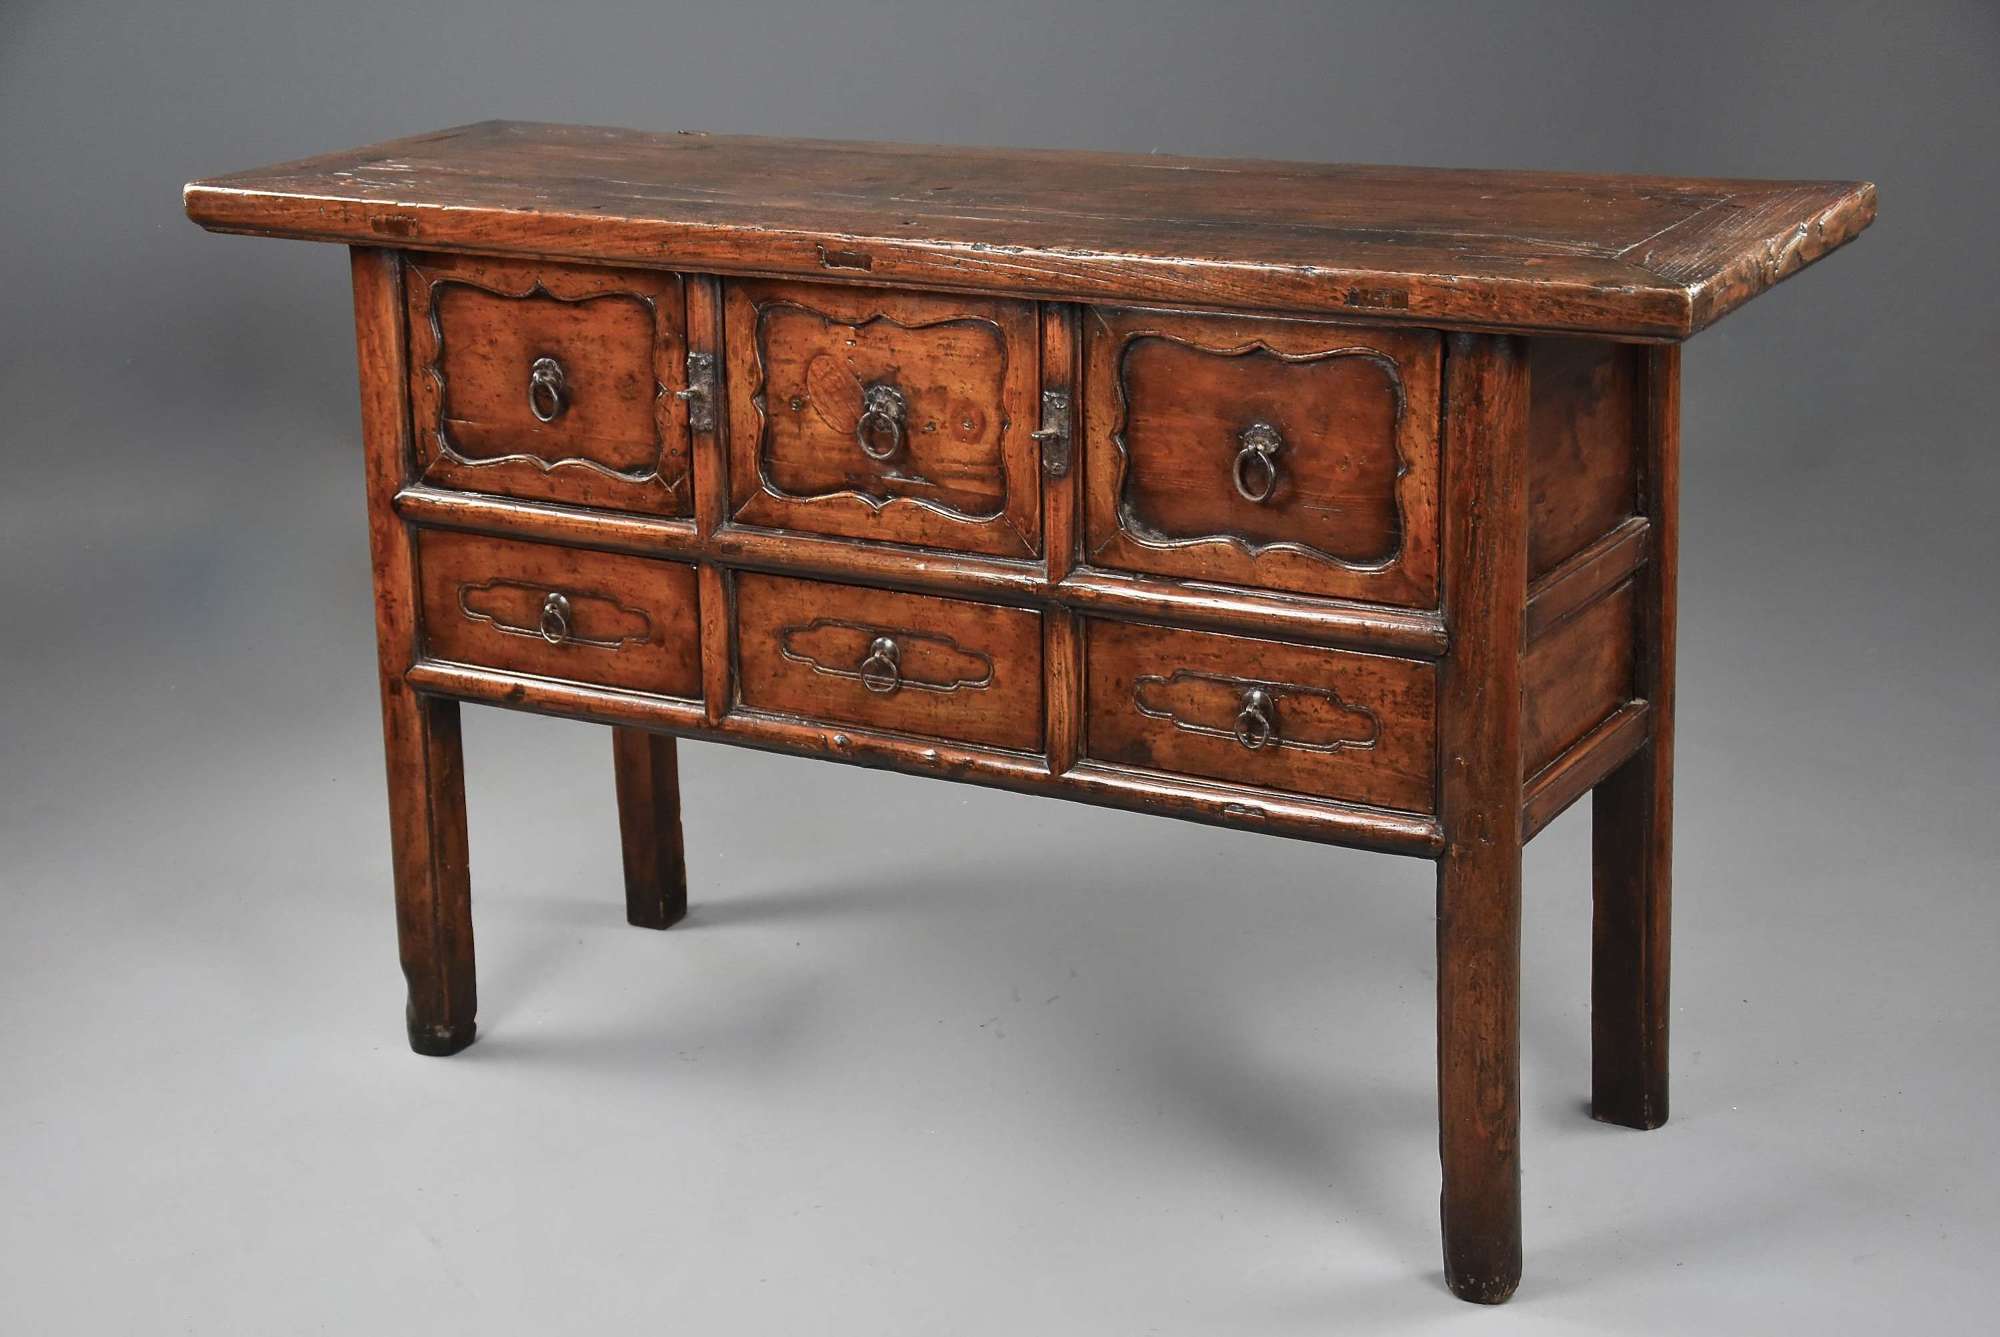 19th century Chinese elm dresser or sideboard of fine patina